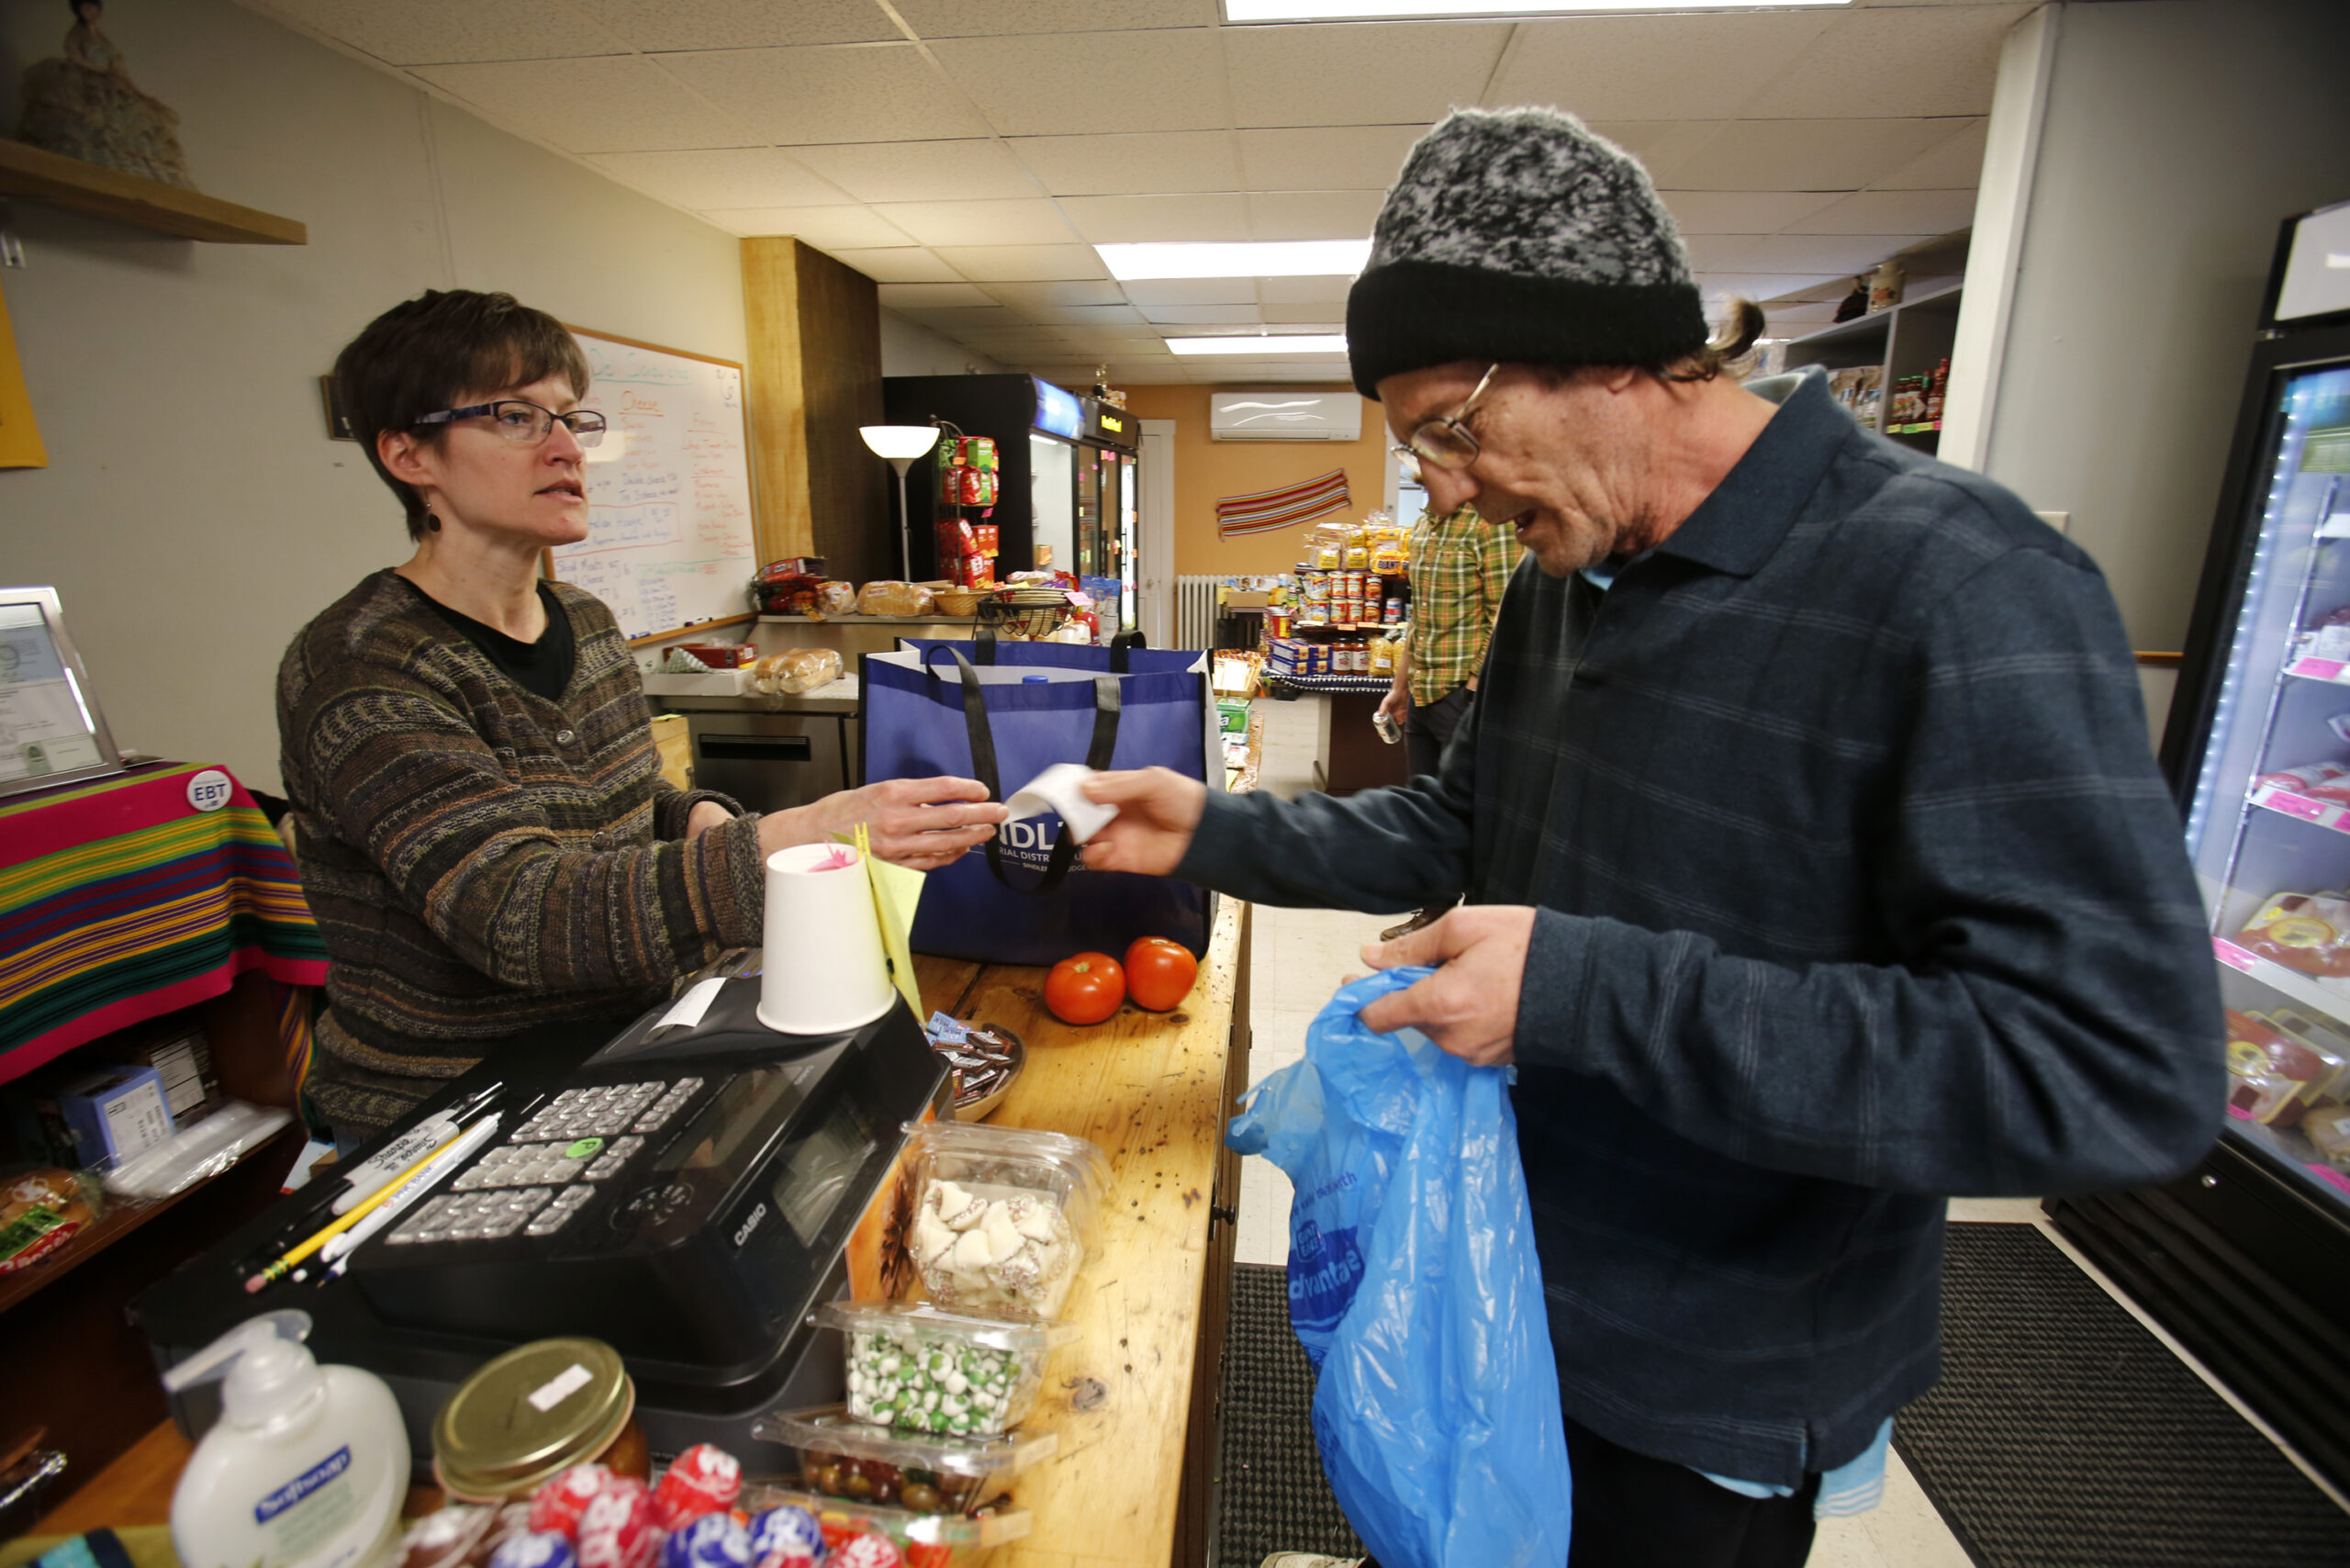 Dianne Shenk, left, helping customer Terry Warby 